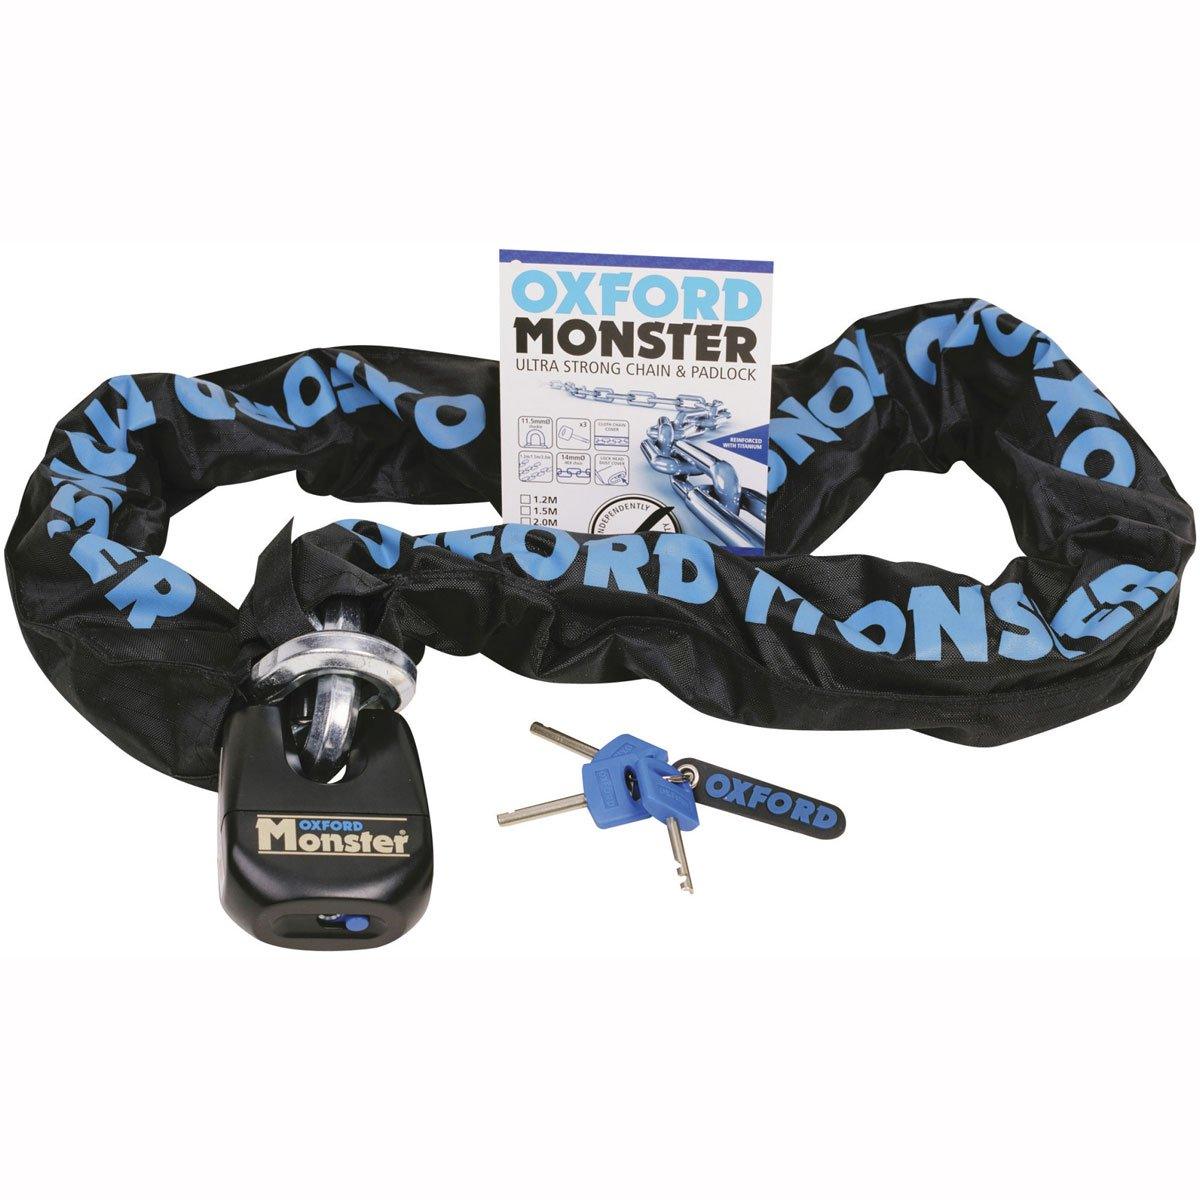 Oxford Monster Ultra Strong Chain and Padlock 200cms